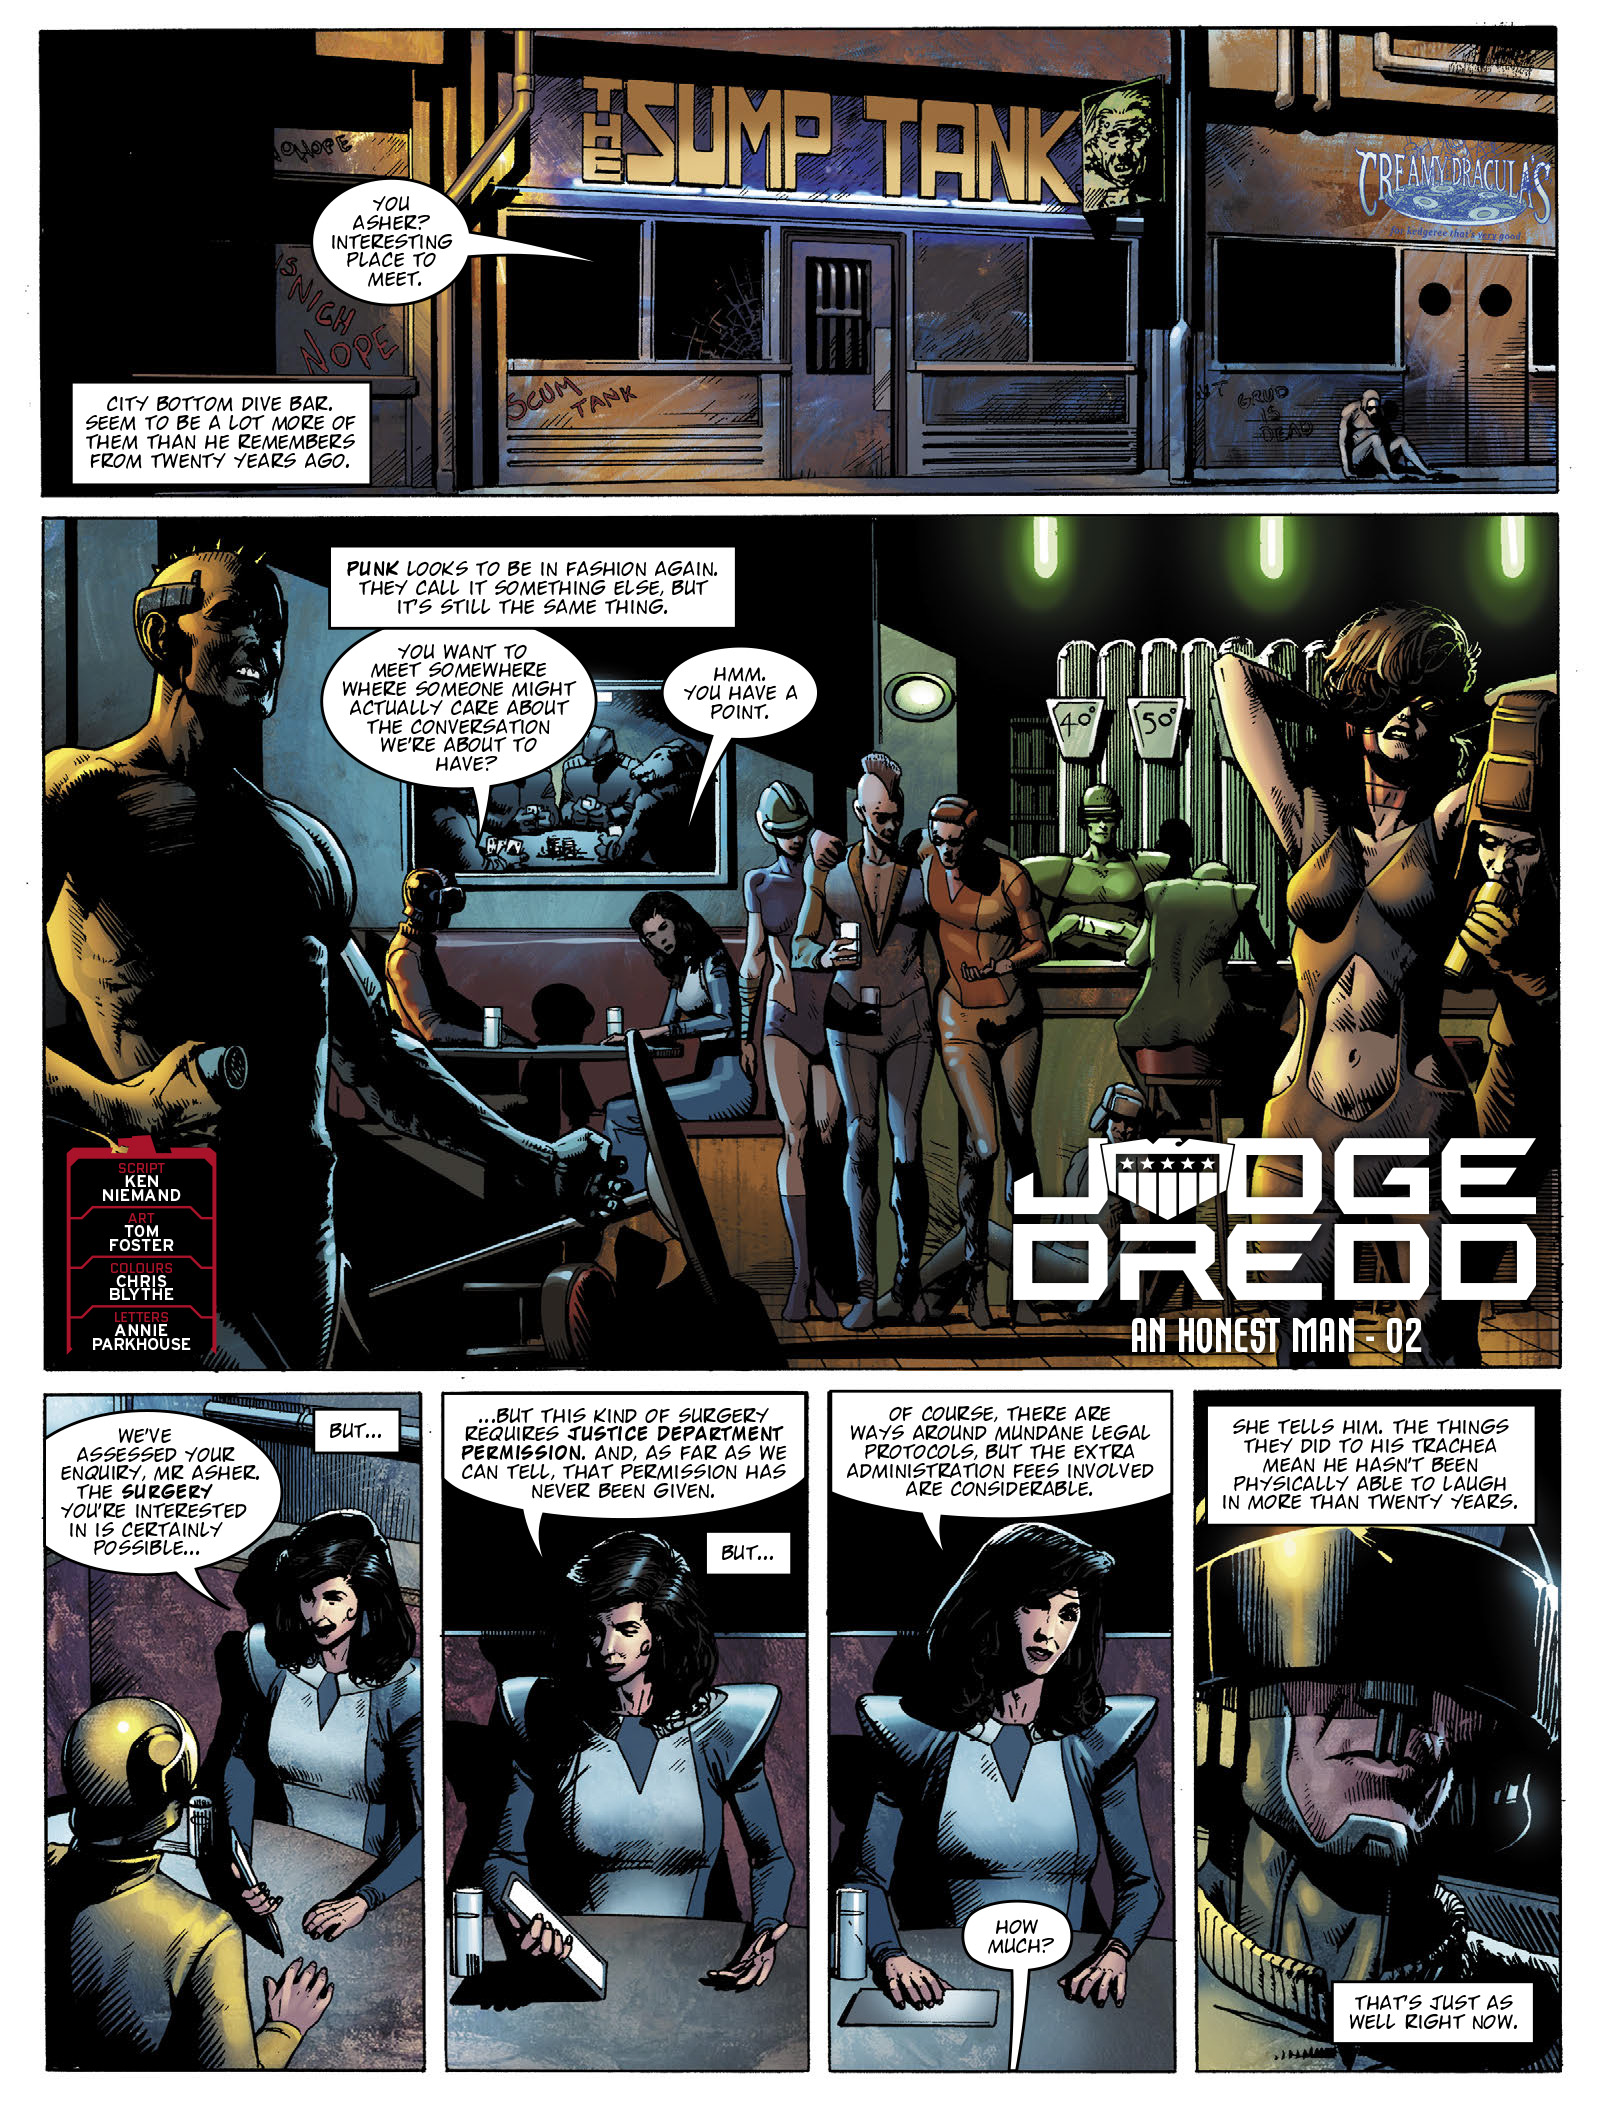 2000 AD: Chapter 2282 - Page 3